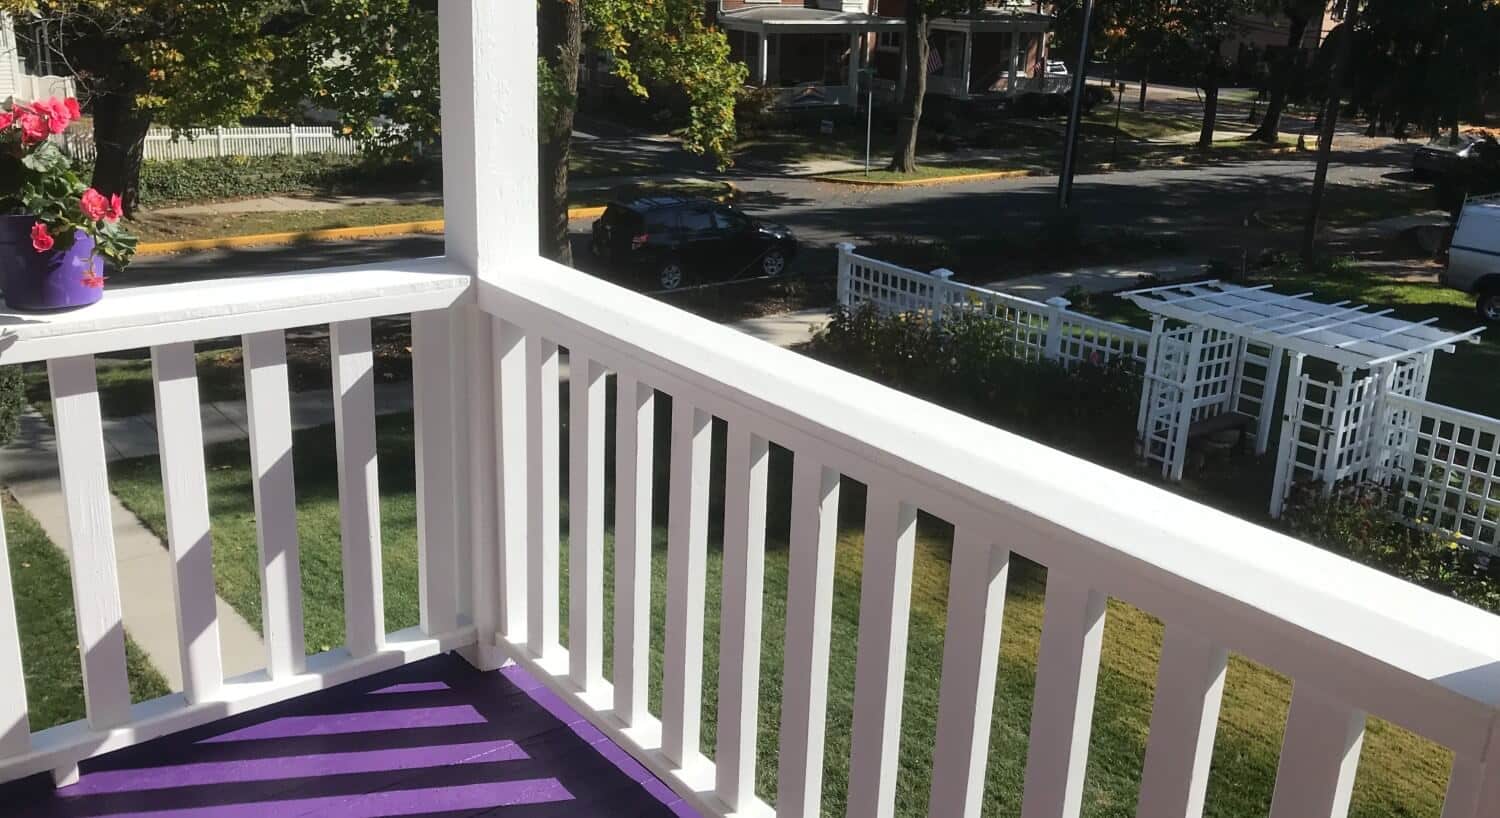 The corner of an upper outdoor balcony with white railings and purple flooring overlooking a yard